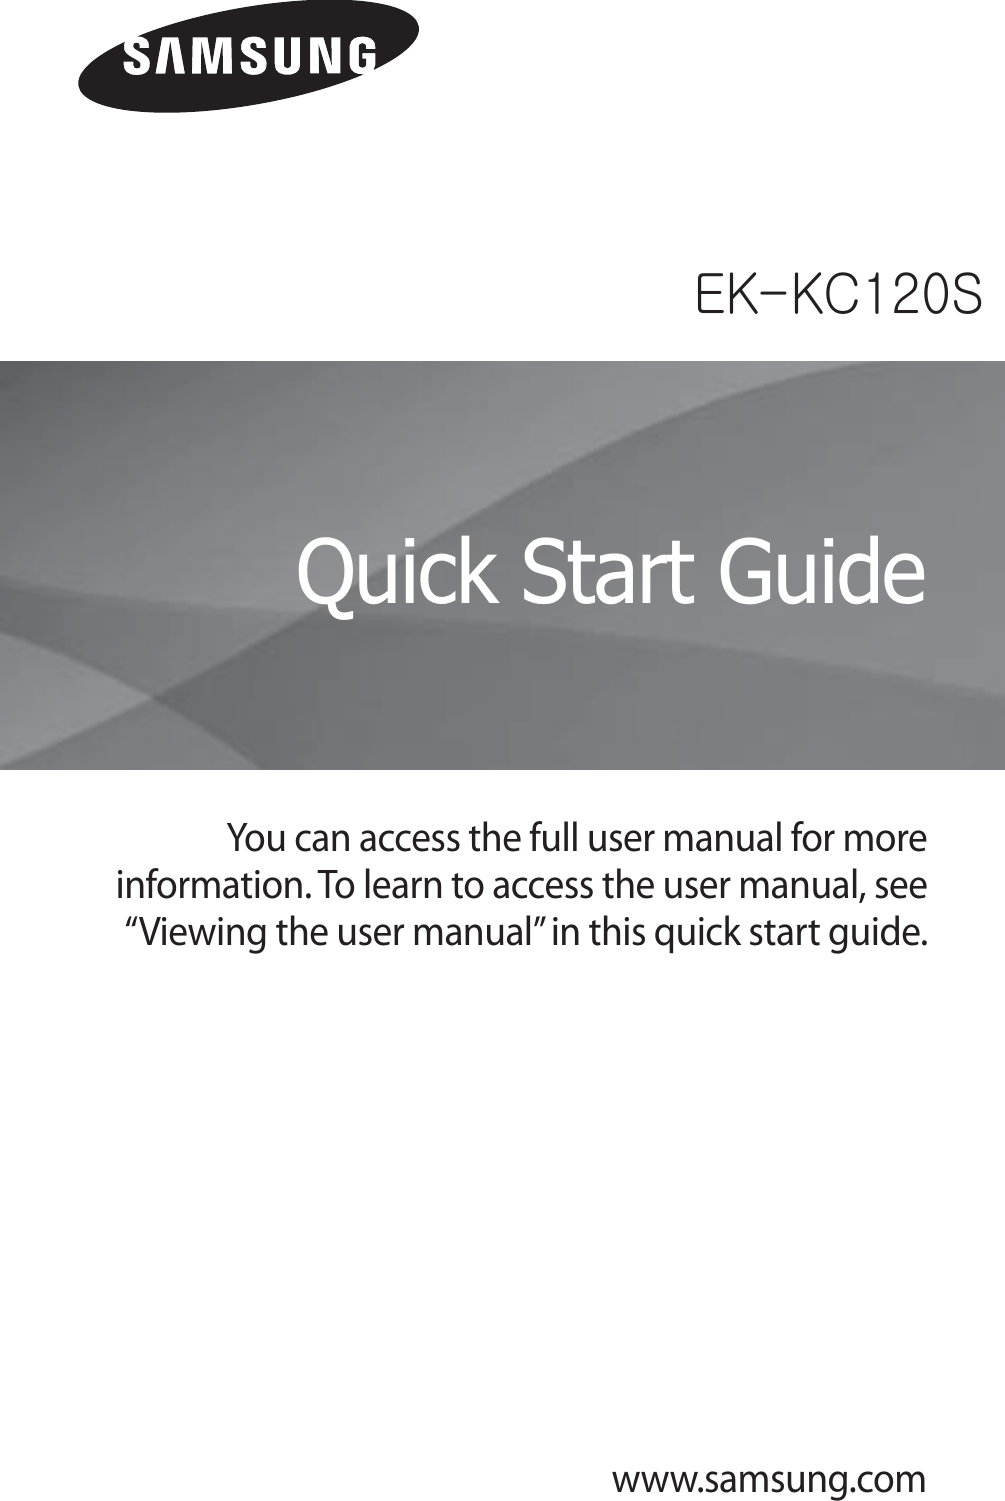 www.samsung.comlrTrjXYWzYou can access the full user manual for more information. To learn to access the user manual, see “Viewing the user manual” in this quick start guide.Quick Start Guide